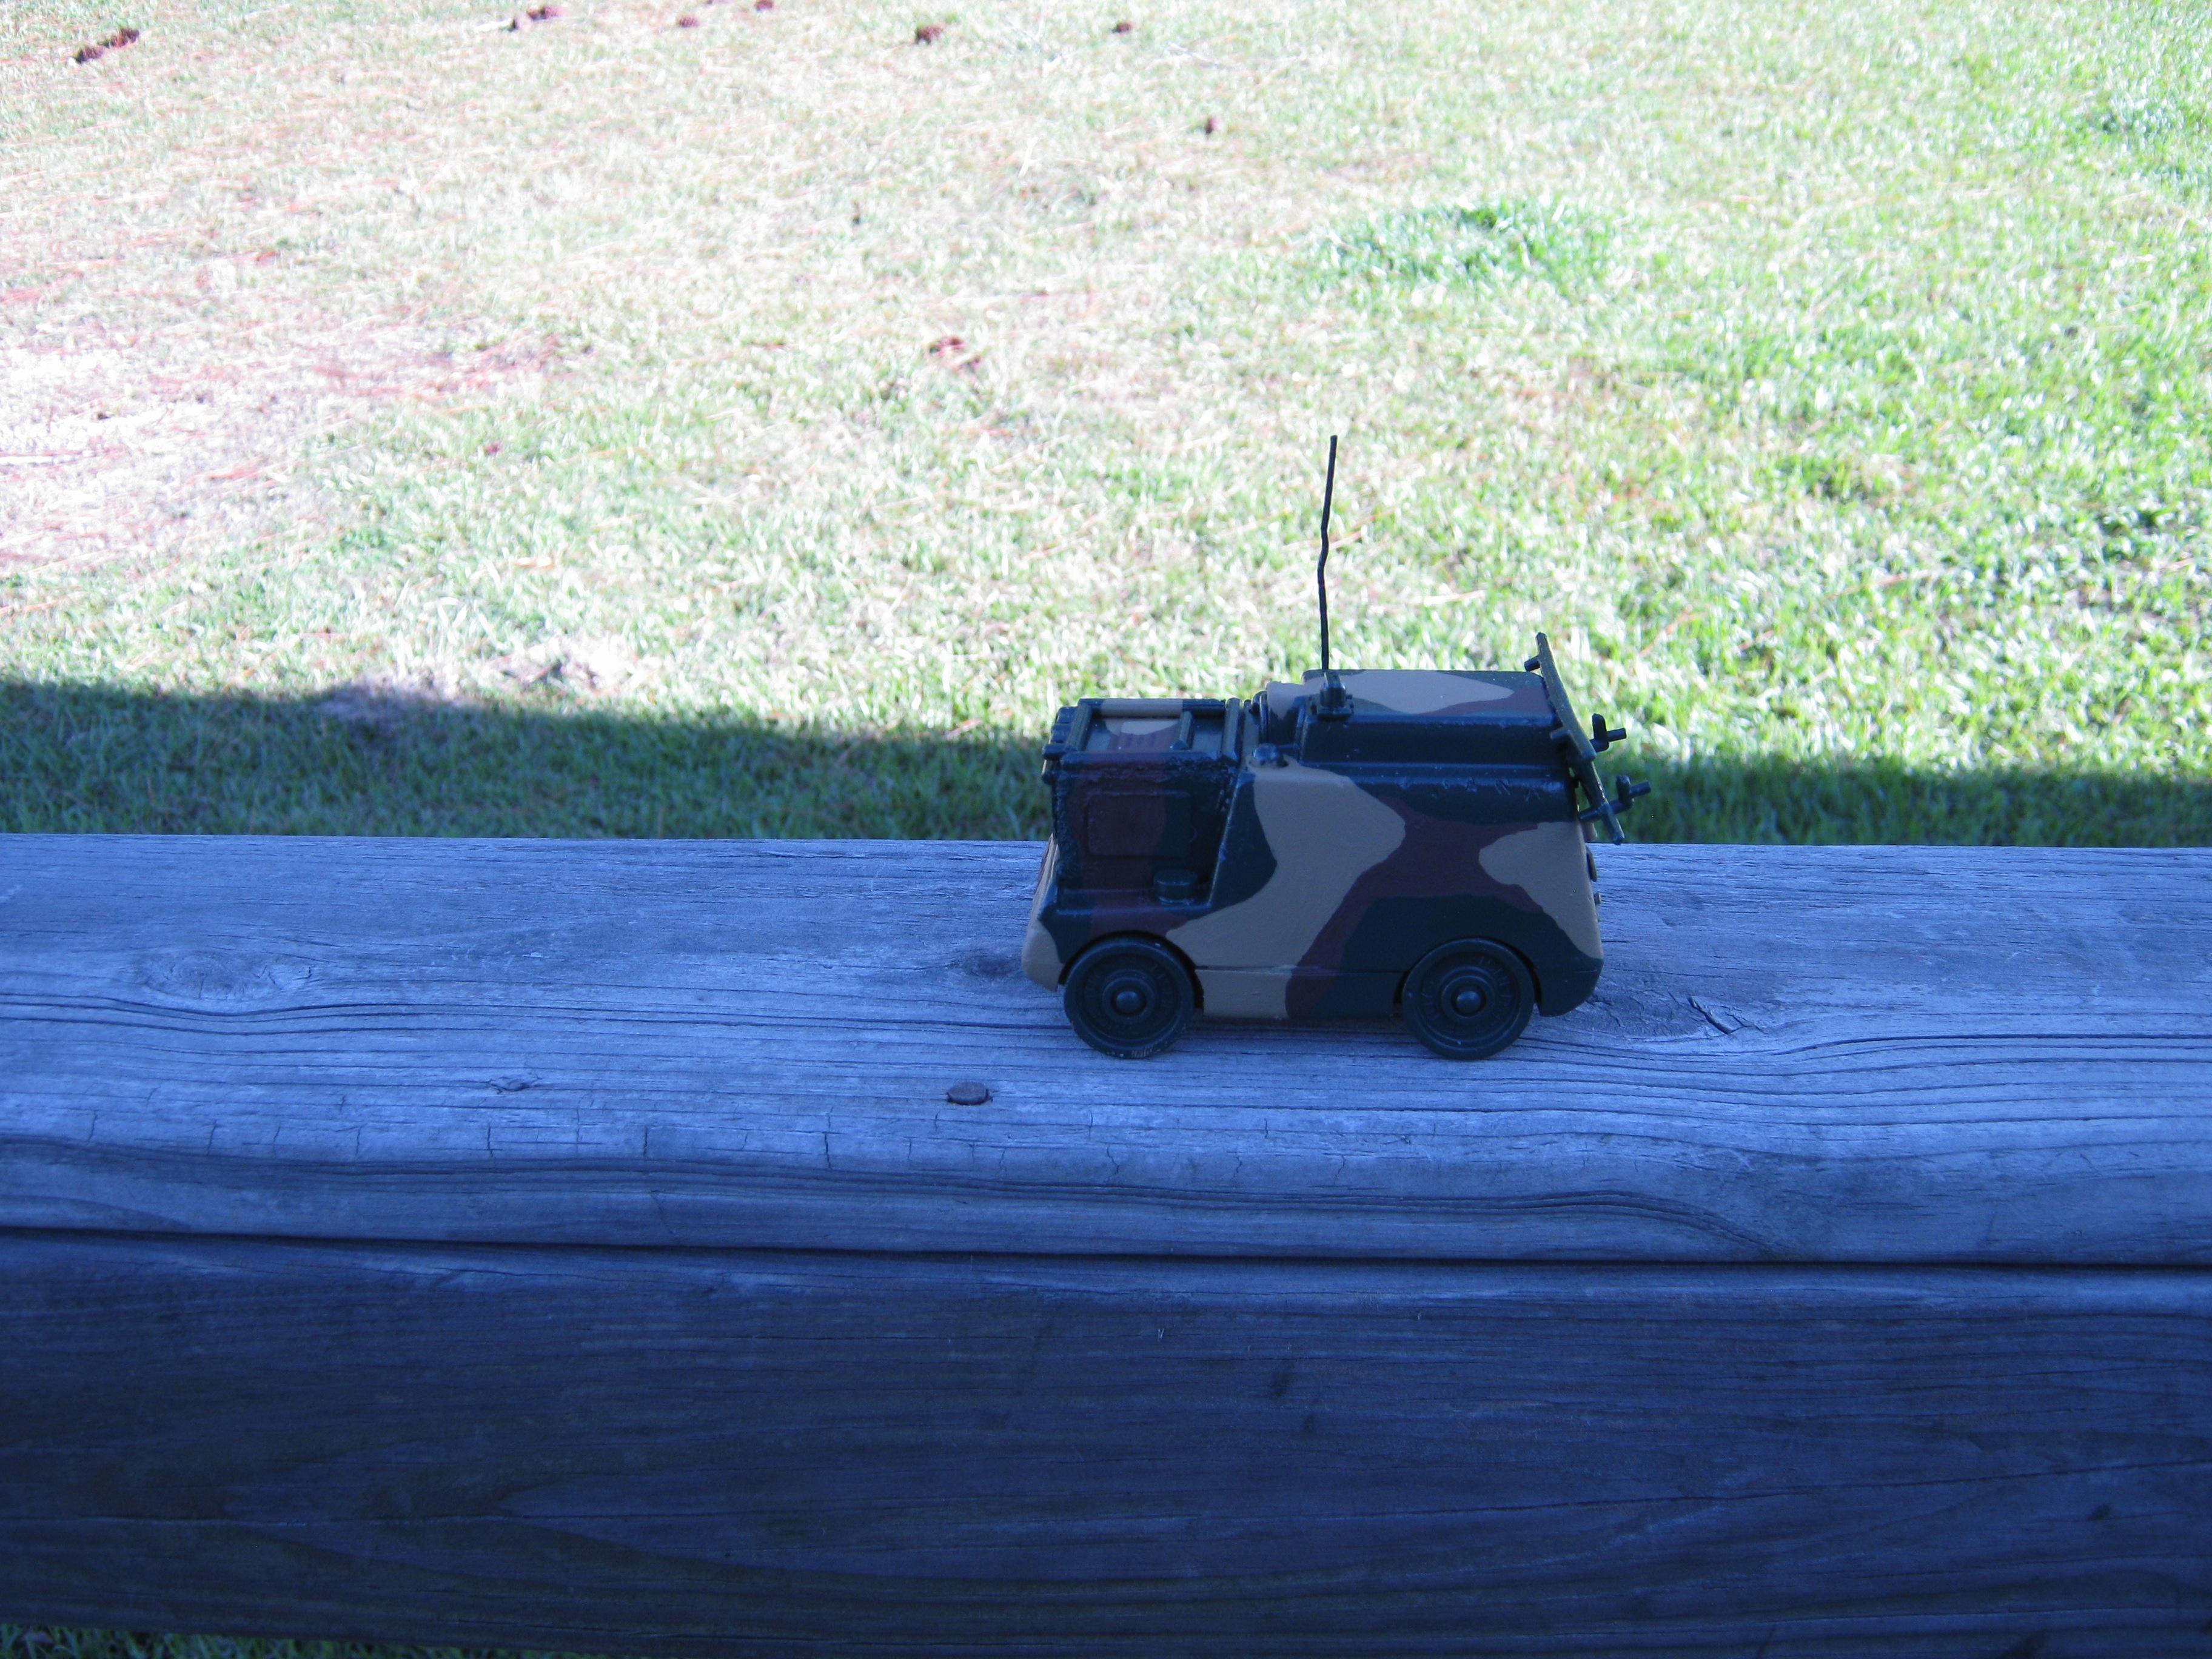 Ambulance, Conversion, Counts As, Fisher Price, Imperial, Military Ambulance, Toy, Truck